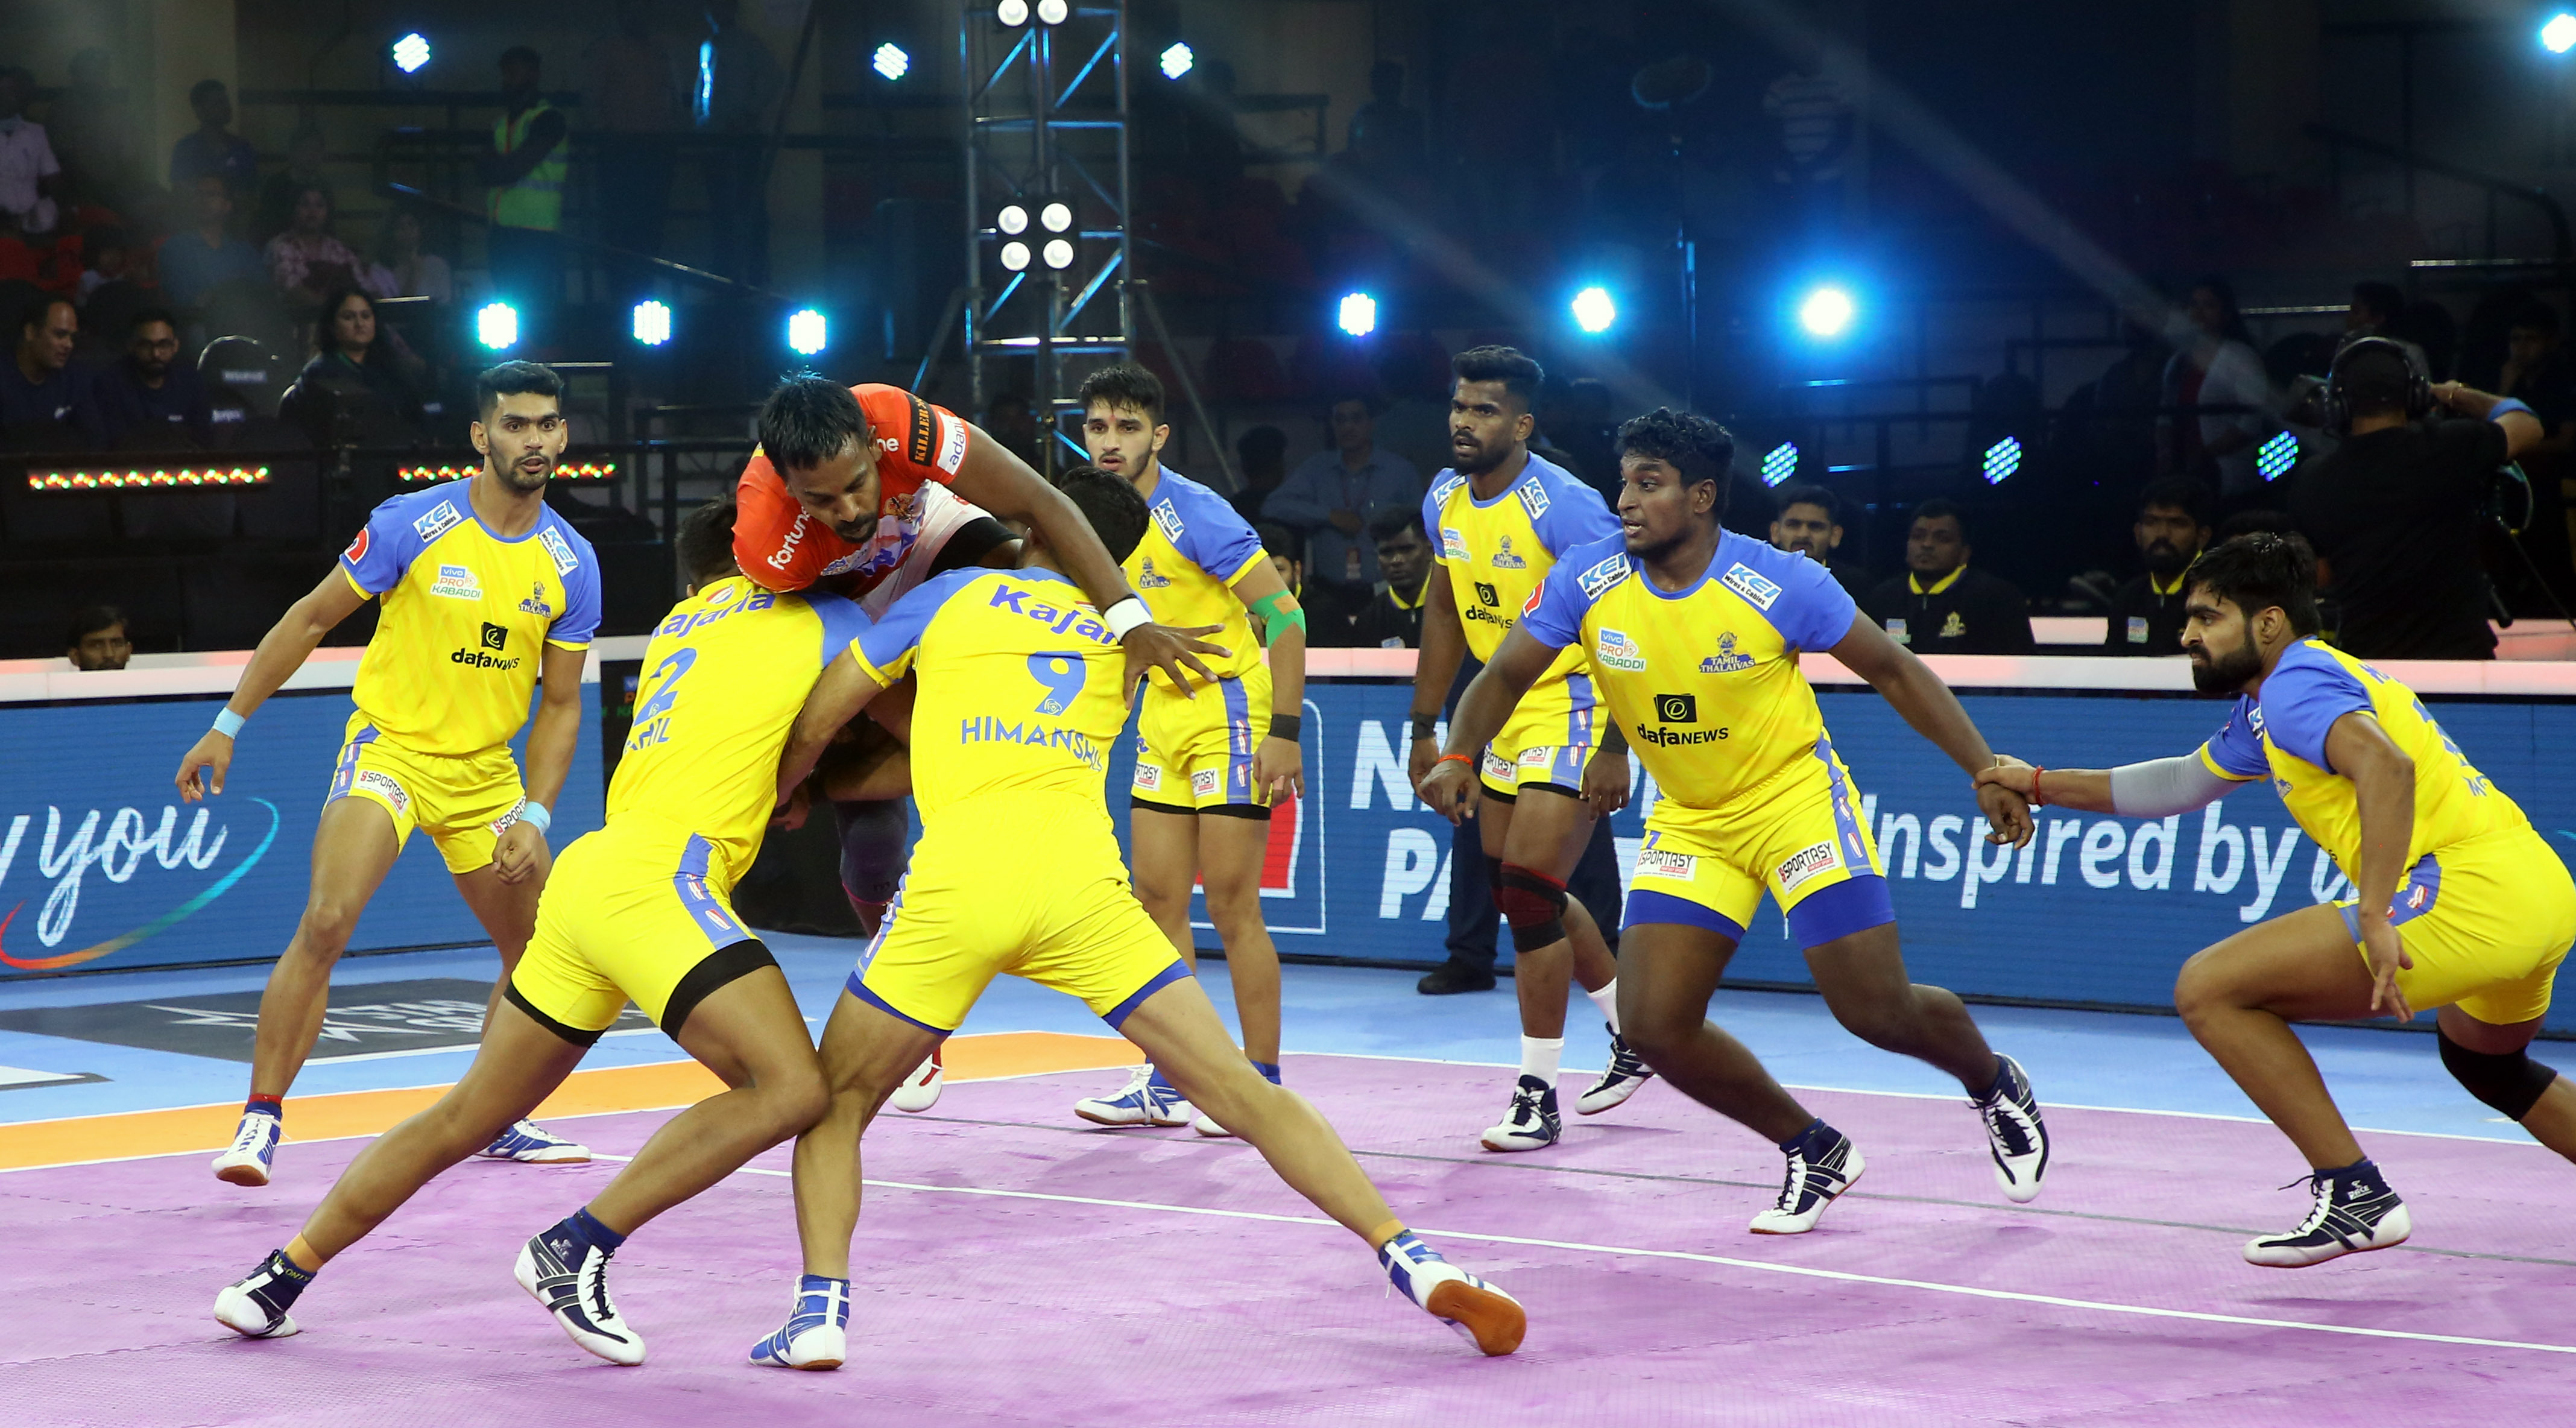 PKL 2022 LIVE: UP Yoddhas look to continue winning momentum as they face Gujarat Giants on Day 12 , Upbeat Tamil Thalaivas take on Bengaluru Bulls in Southern Derby in Pro Kabaddi League 9 - Follow LIVE updates